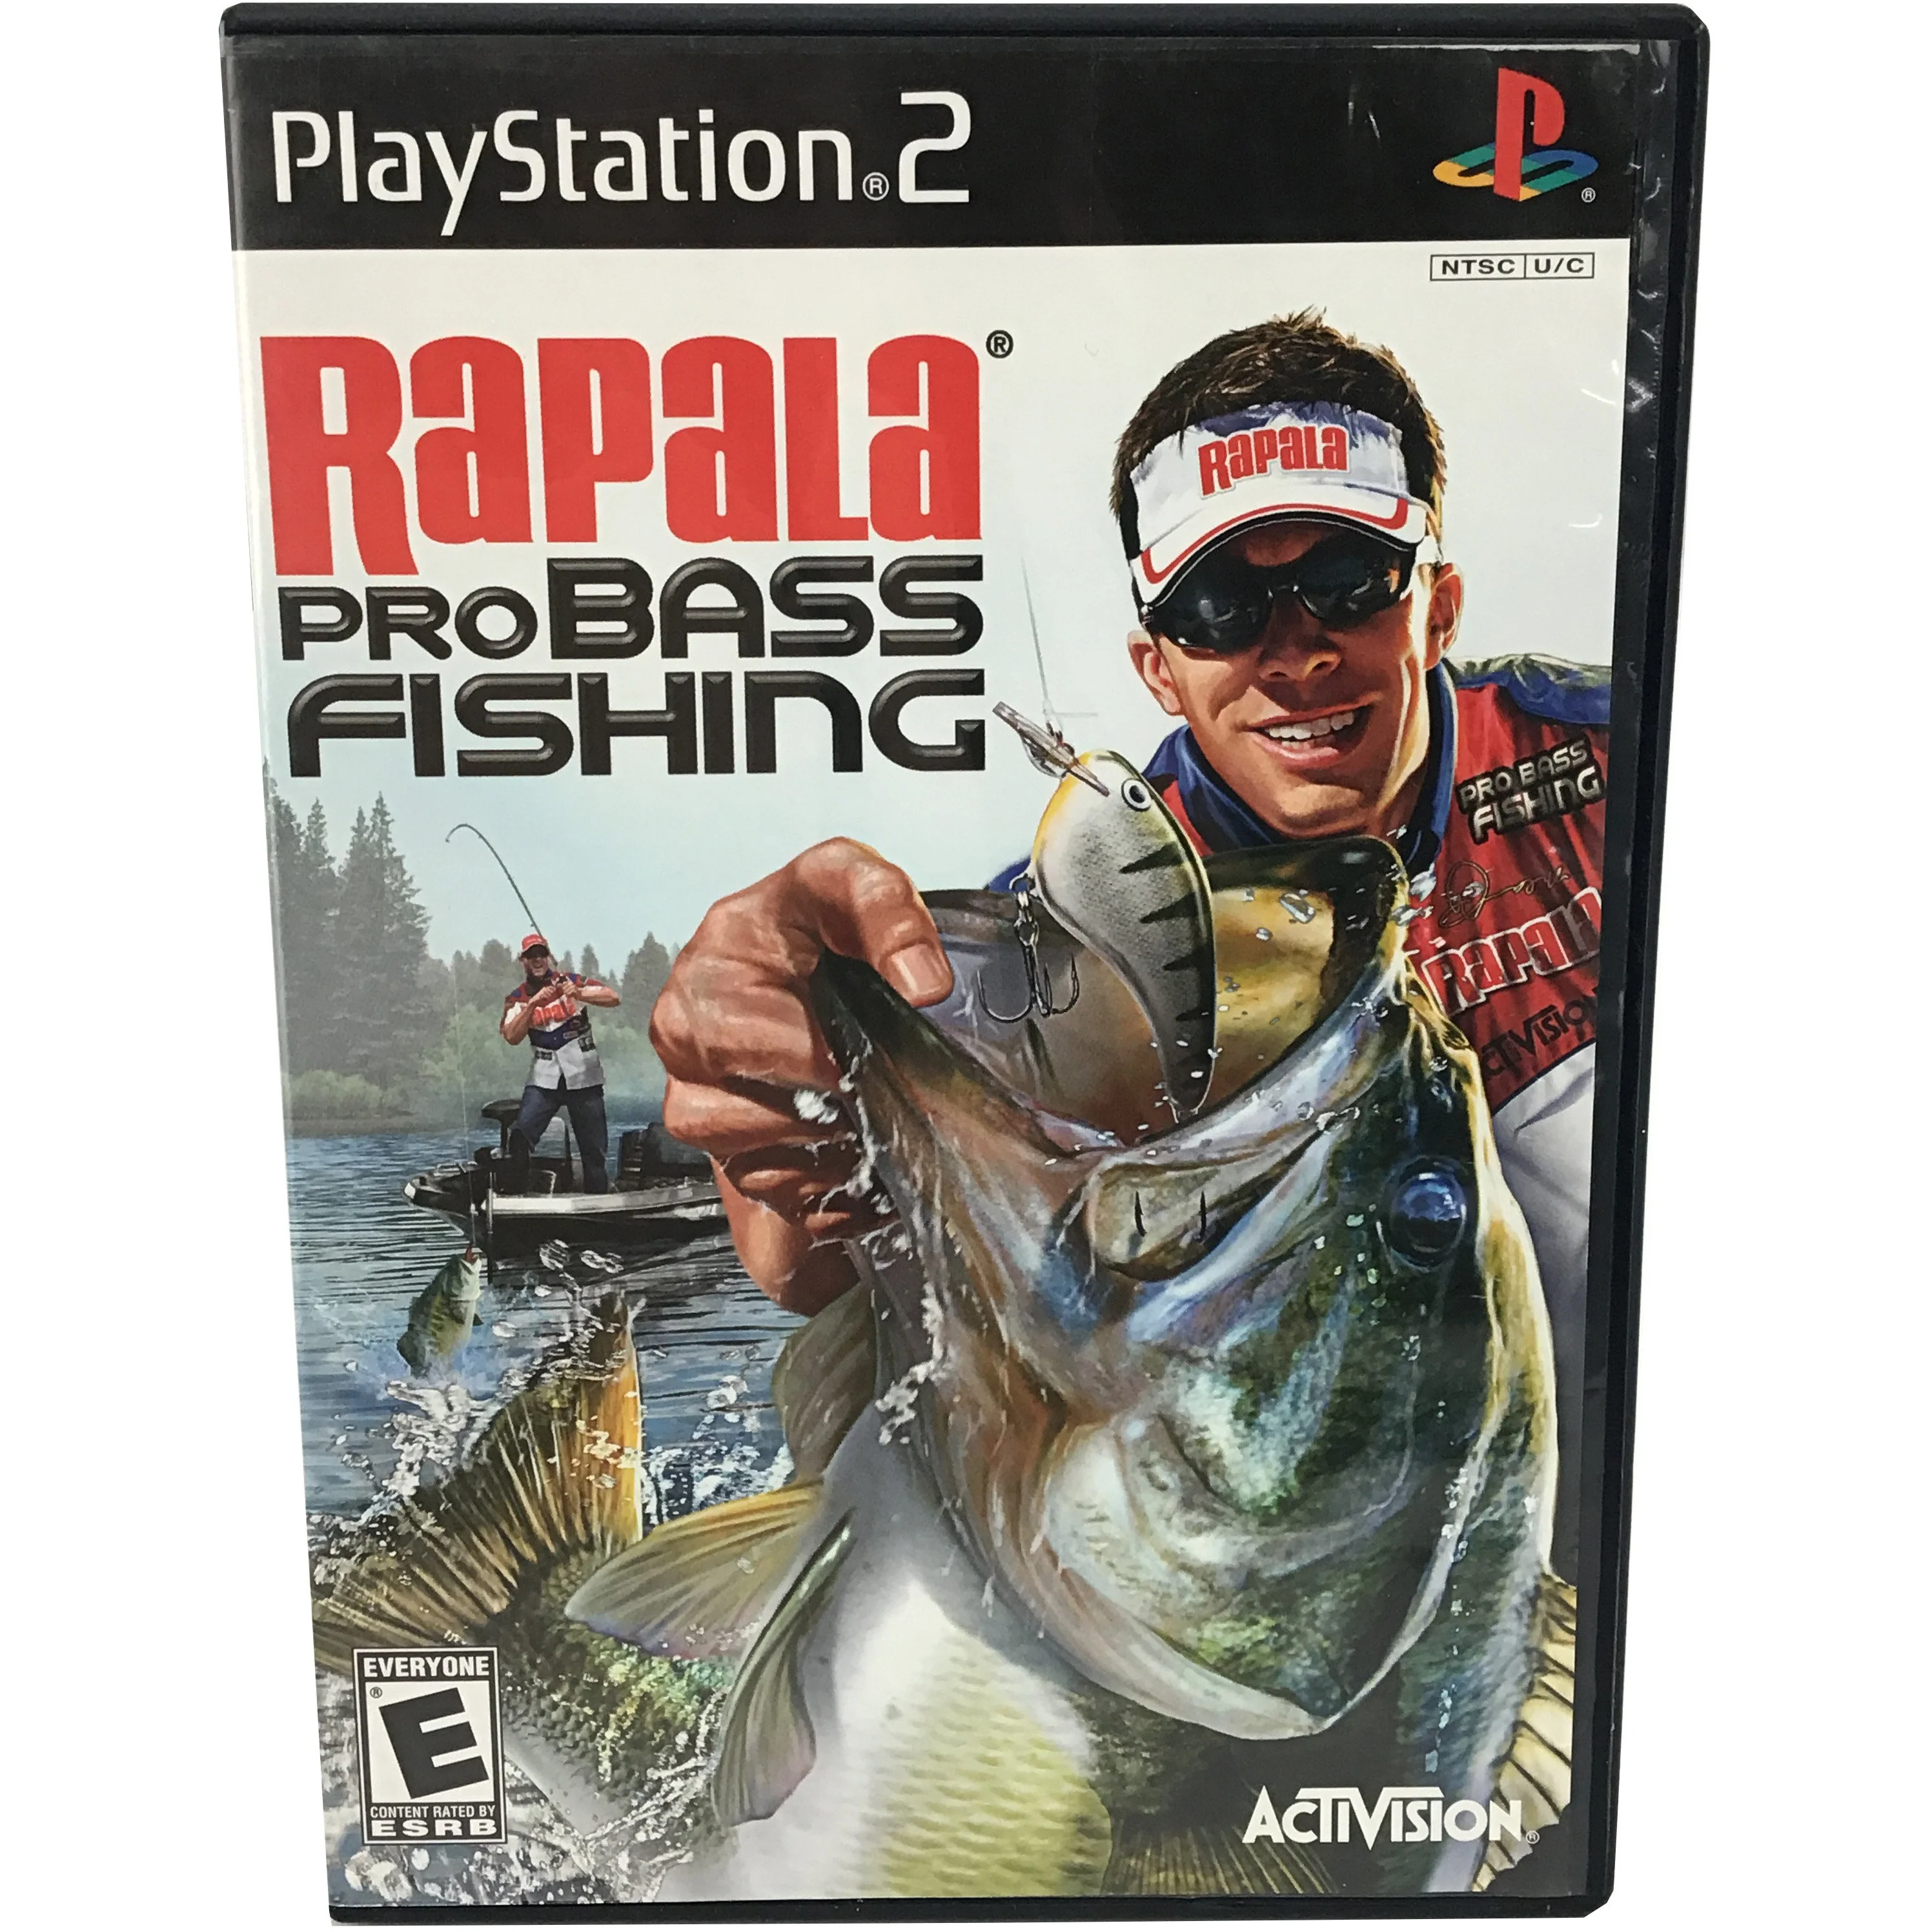 Play Station 2: Rapala ProBass Fishing Game / Video Game **USED